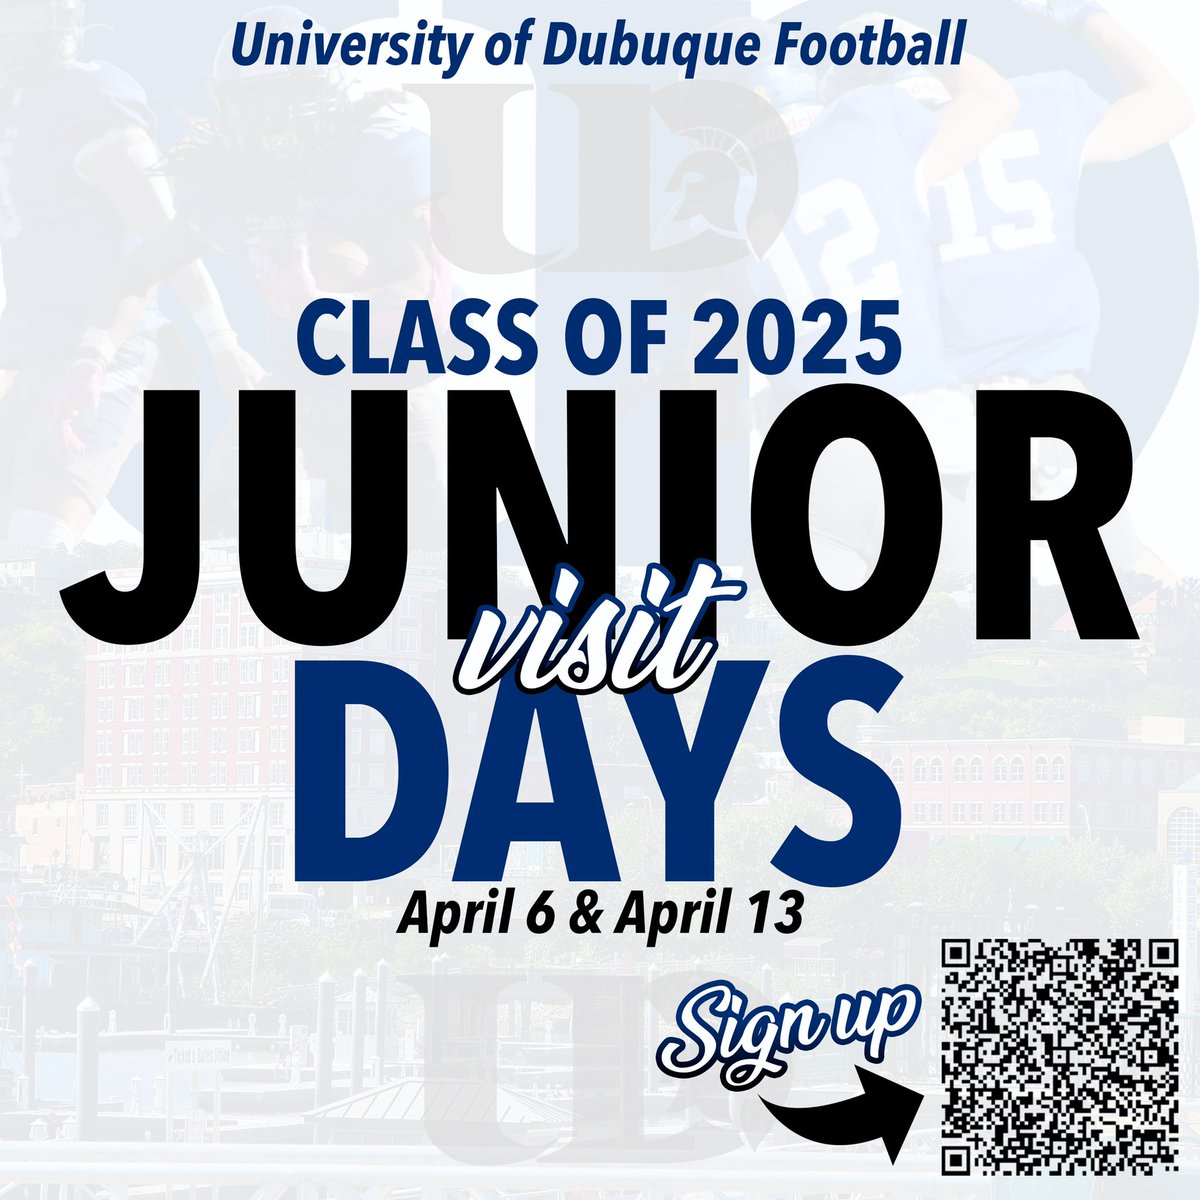 🚨CLASS OF 2025🚨 Come join us on April 6th or April 13th for Junior Days!! A great opportunity to meet our staff and learn more about us. LINK⬇️ docs.google.com/forms/d/1qxCSA…